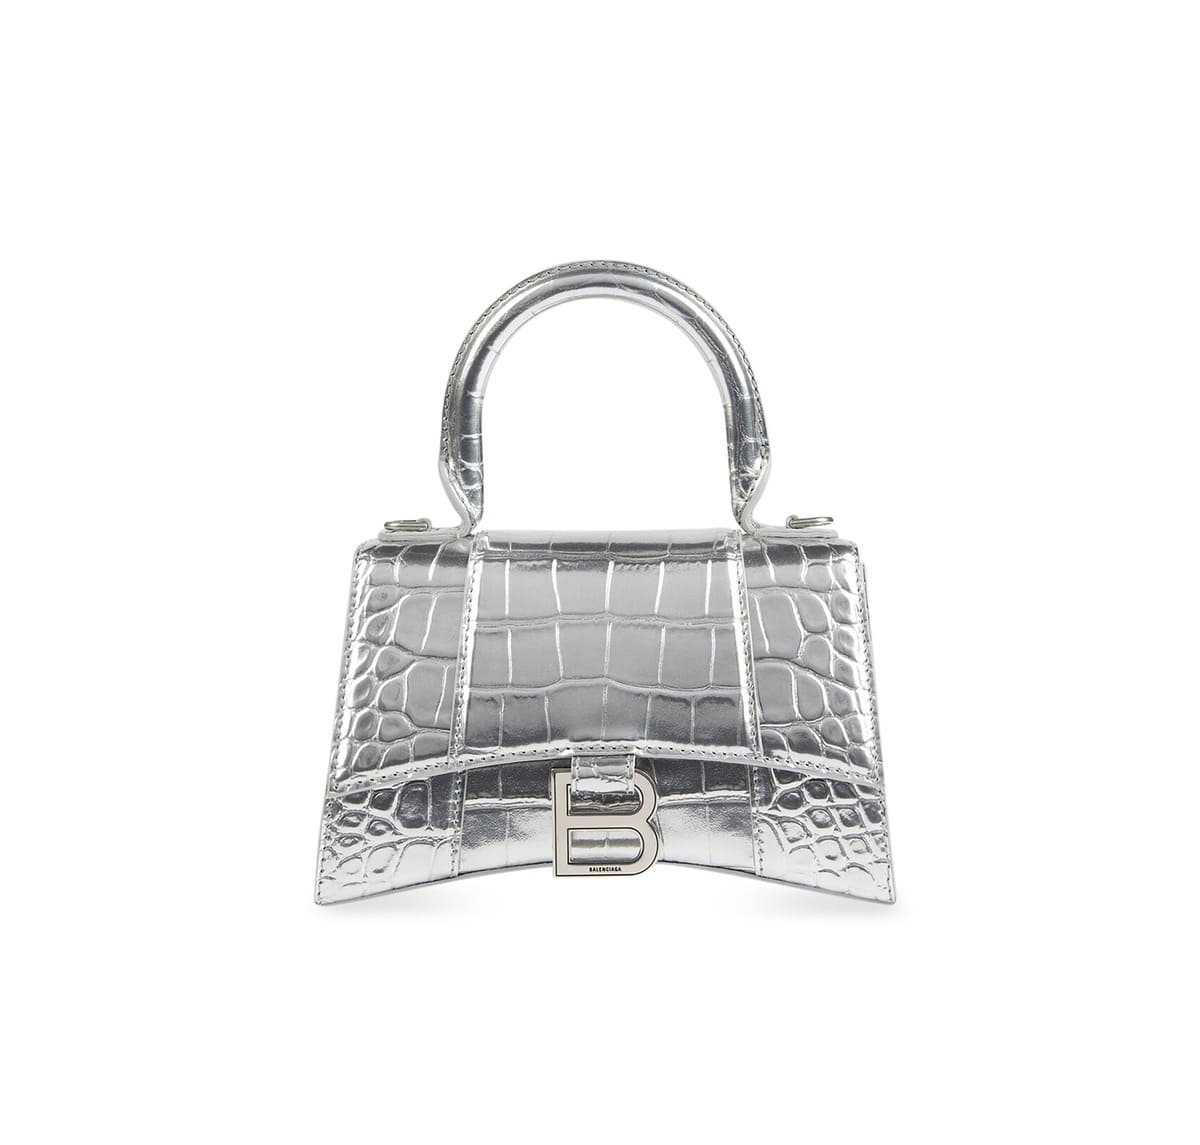 Balenciaga Hourglass XS Bag in Croc Embossed silver